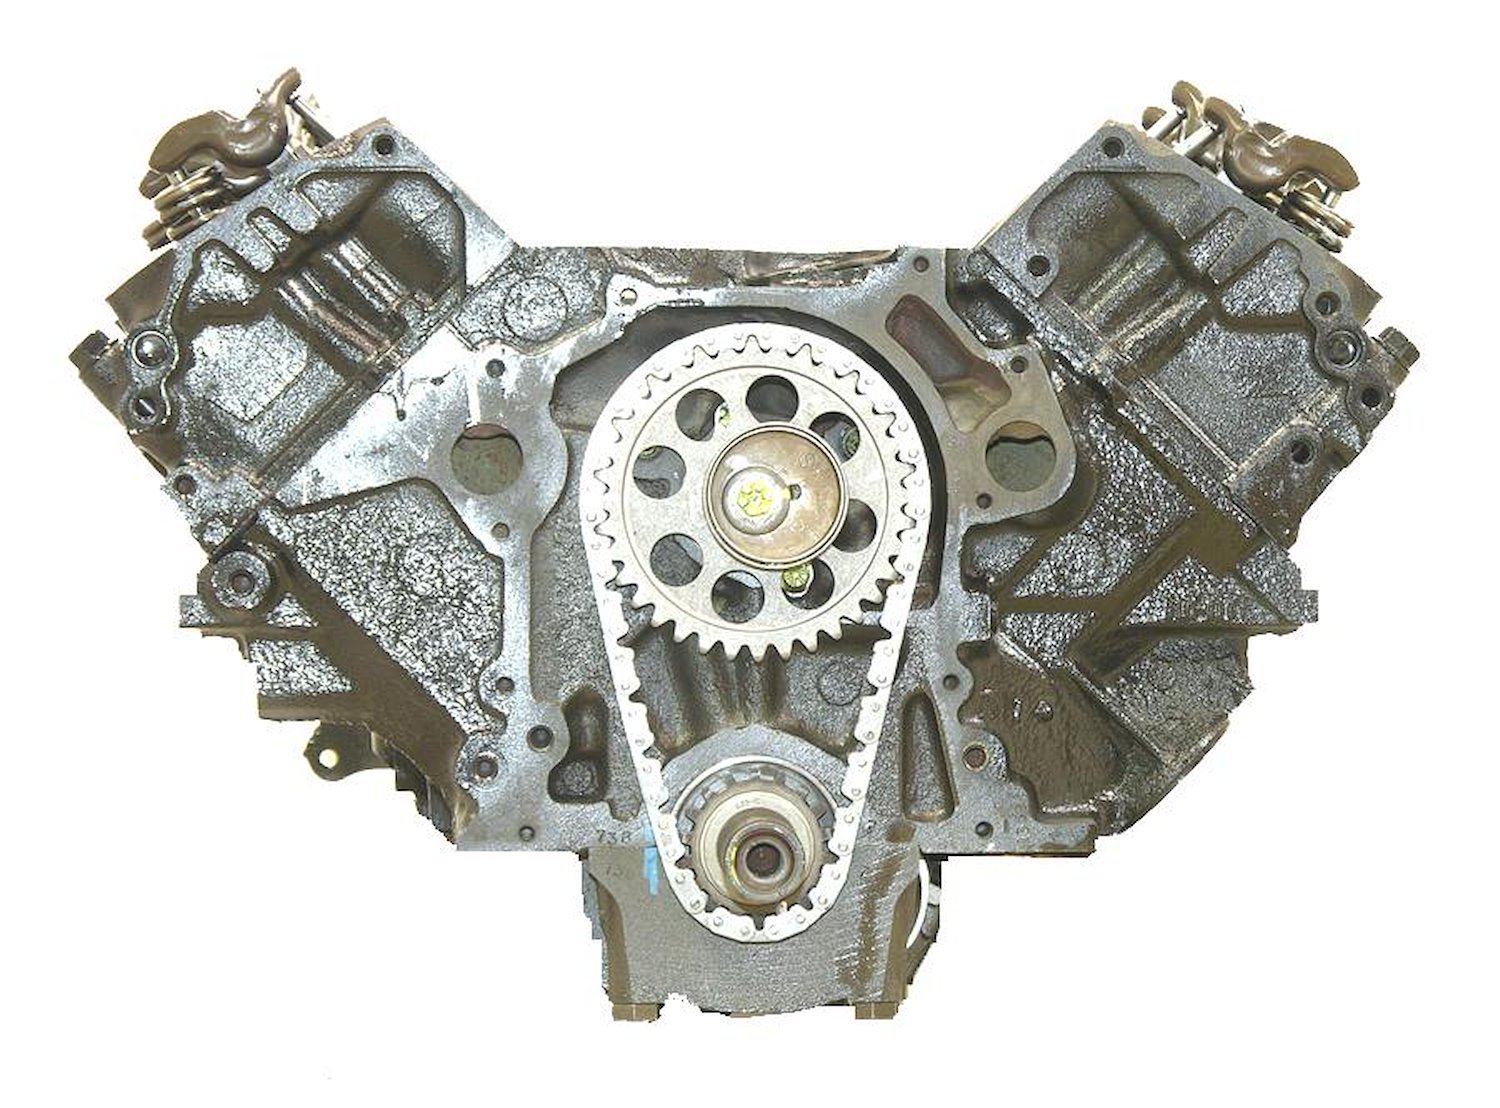 DF82 Remanufactured Crate Engine for 1979-1985 Ford Truck, Car, & Van with 460ci/7.5L V8